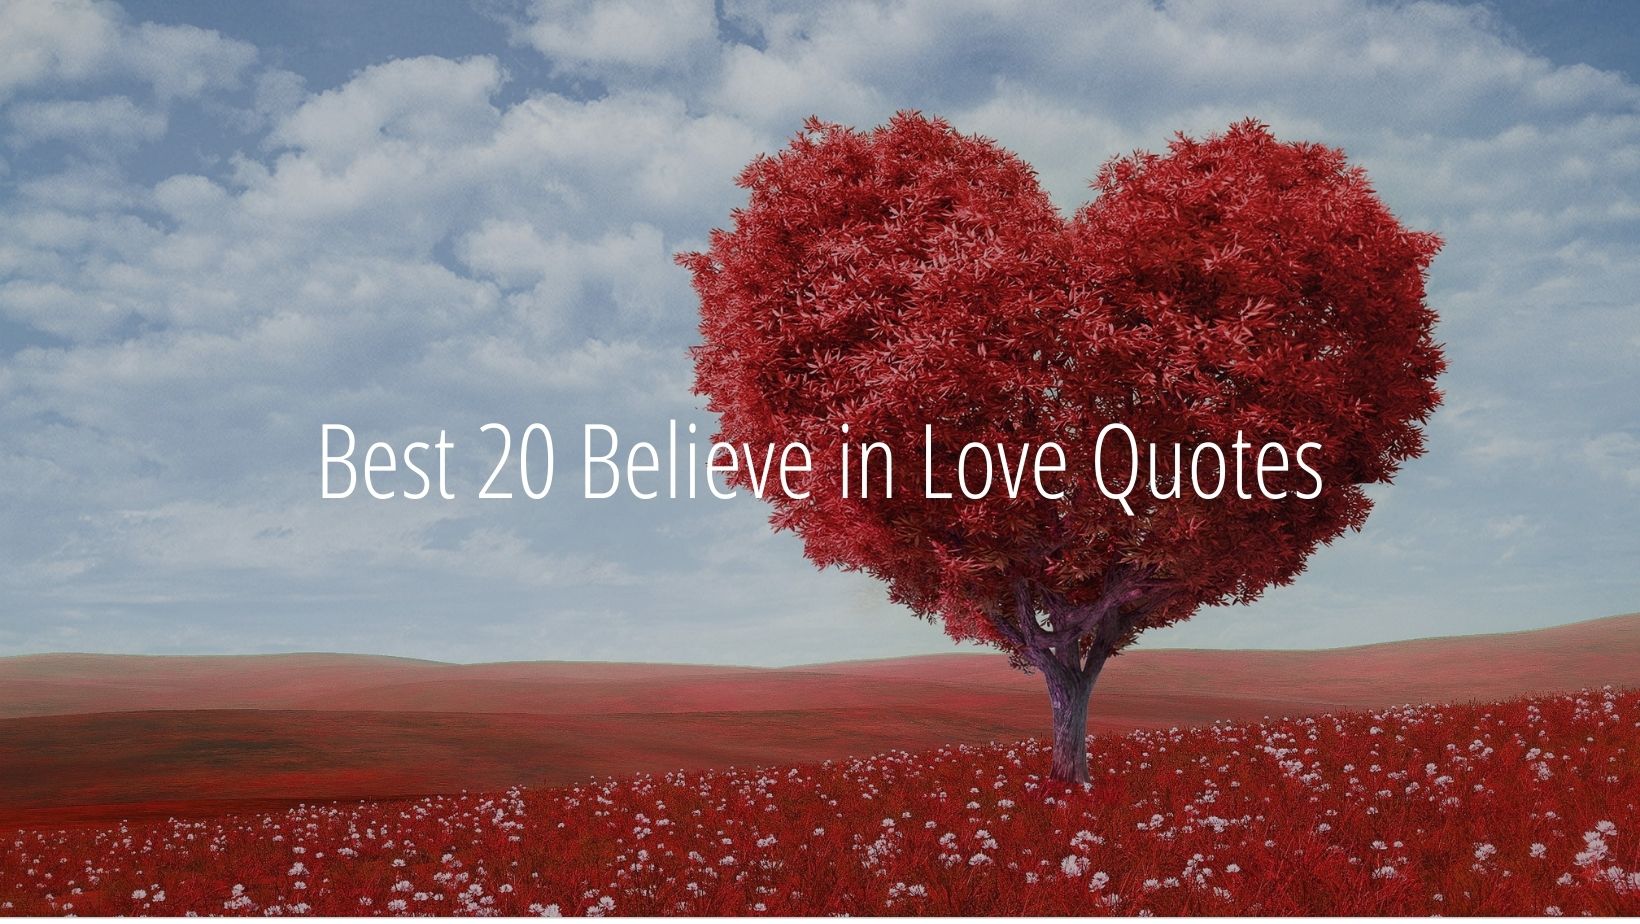 Believe in Love Quotes